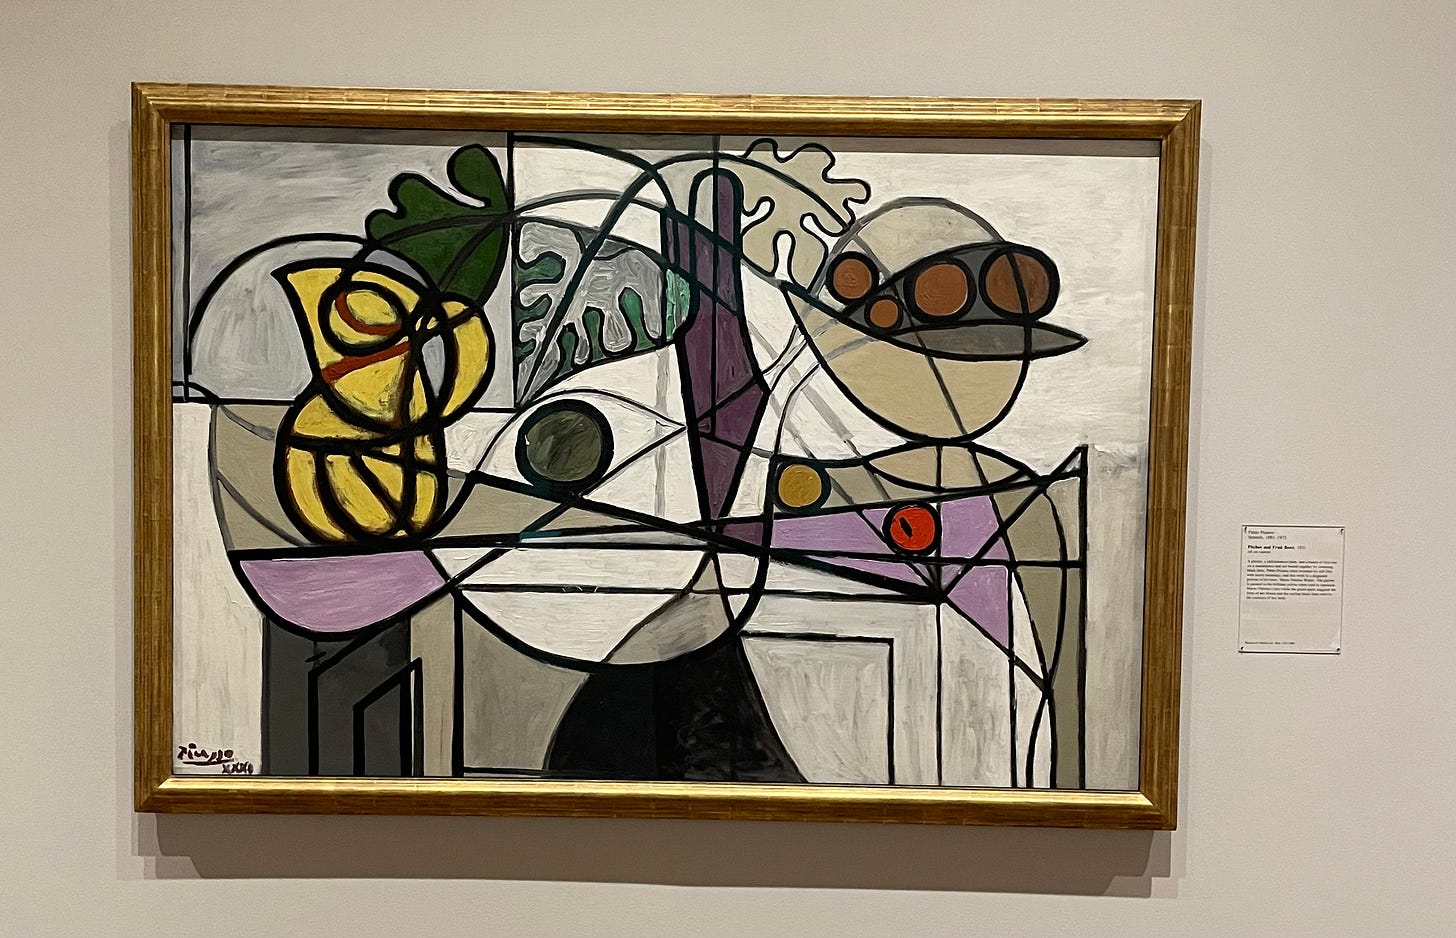 A Picasso at the St. Louis Art Museum.